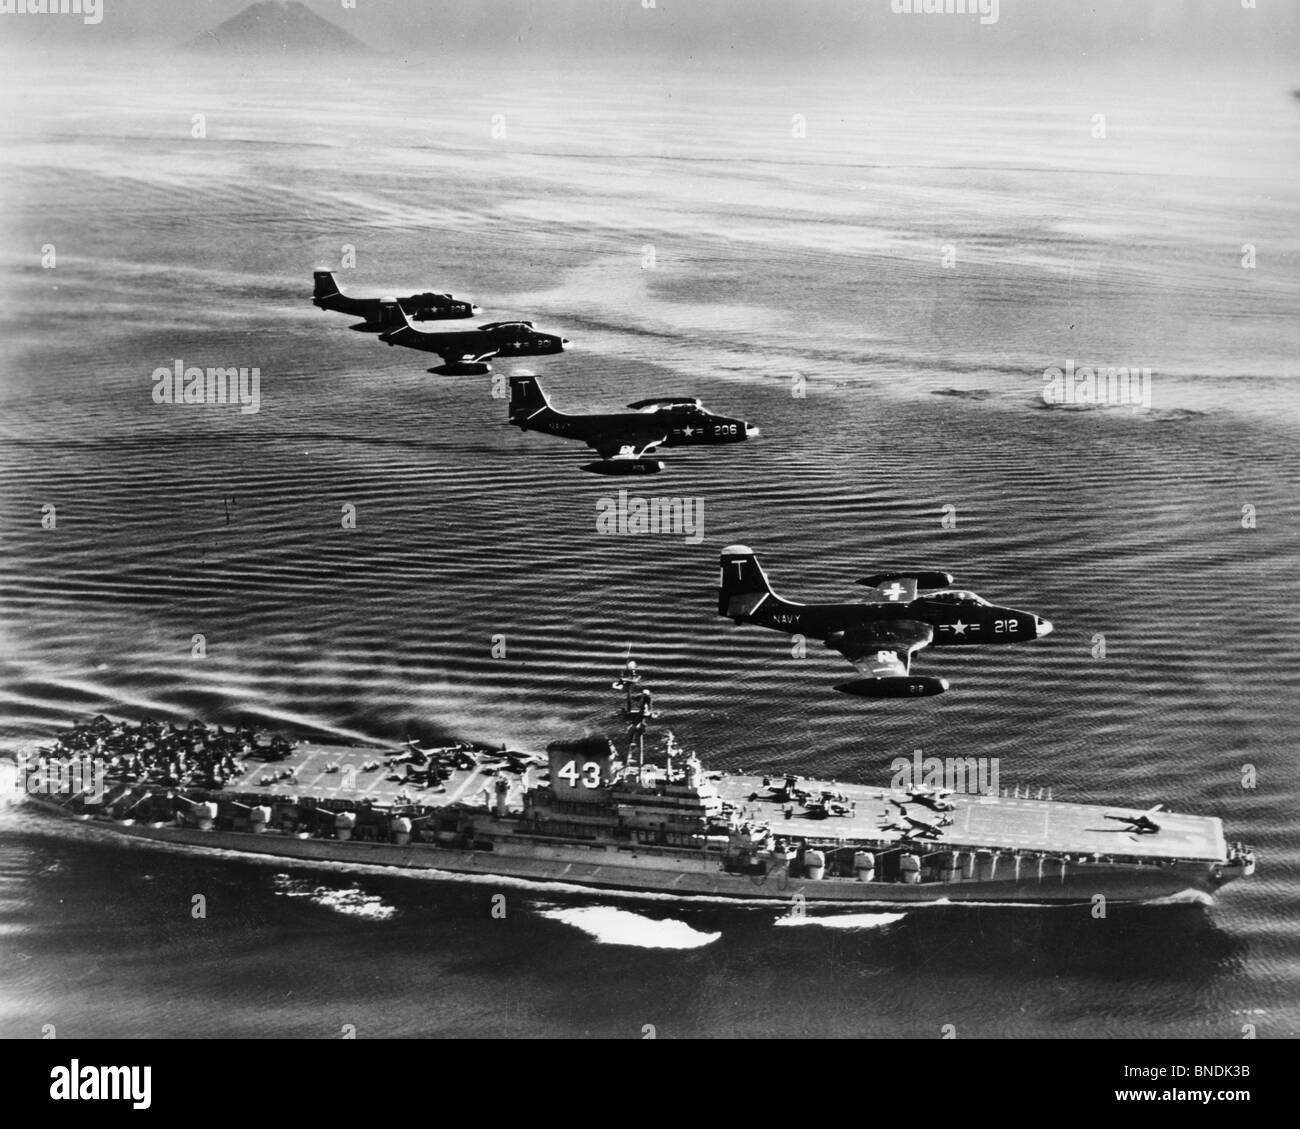 High angle view of four fighter planes flying over an aircraft carrier, US Navy Banshees, USS Coral Sea (CV-43) Stock Photo